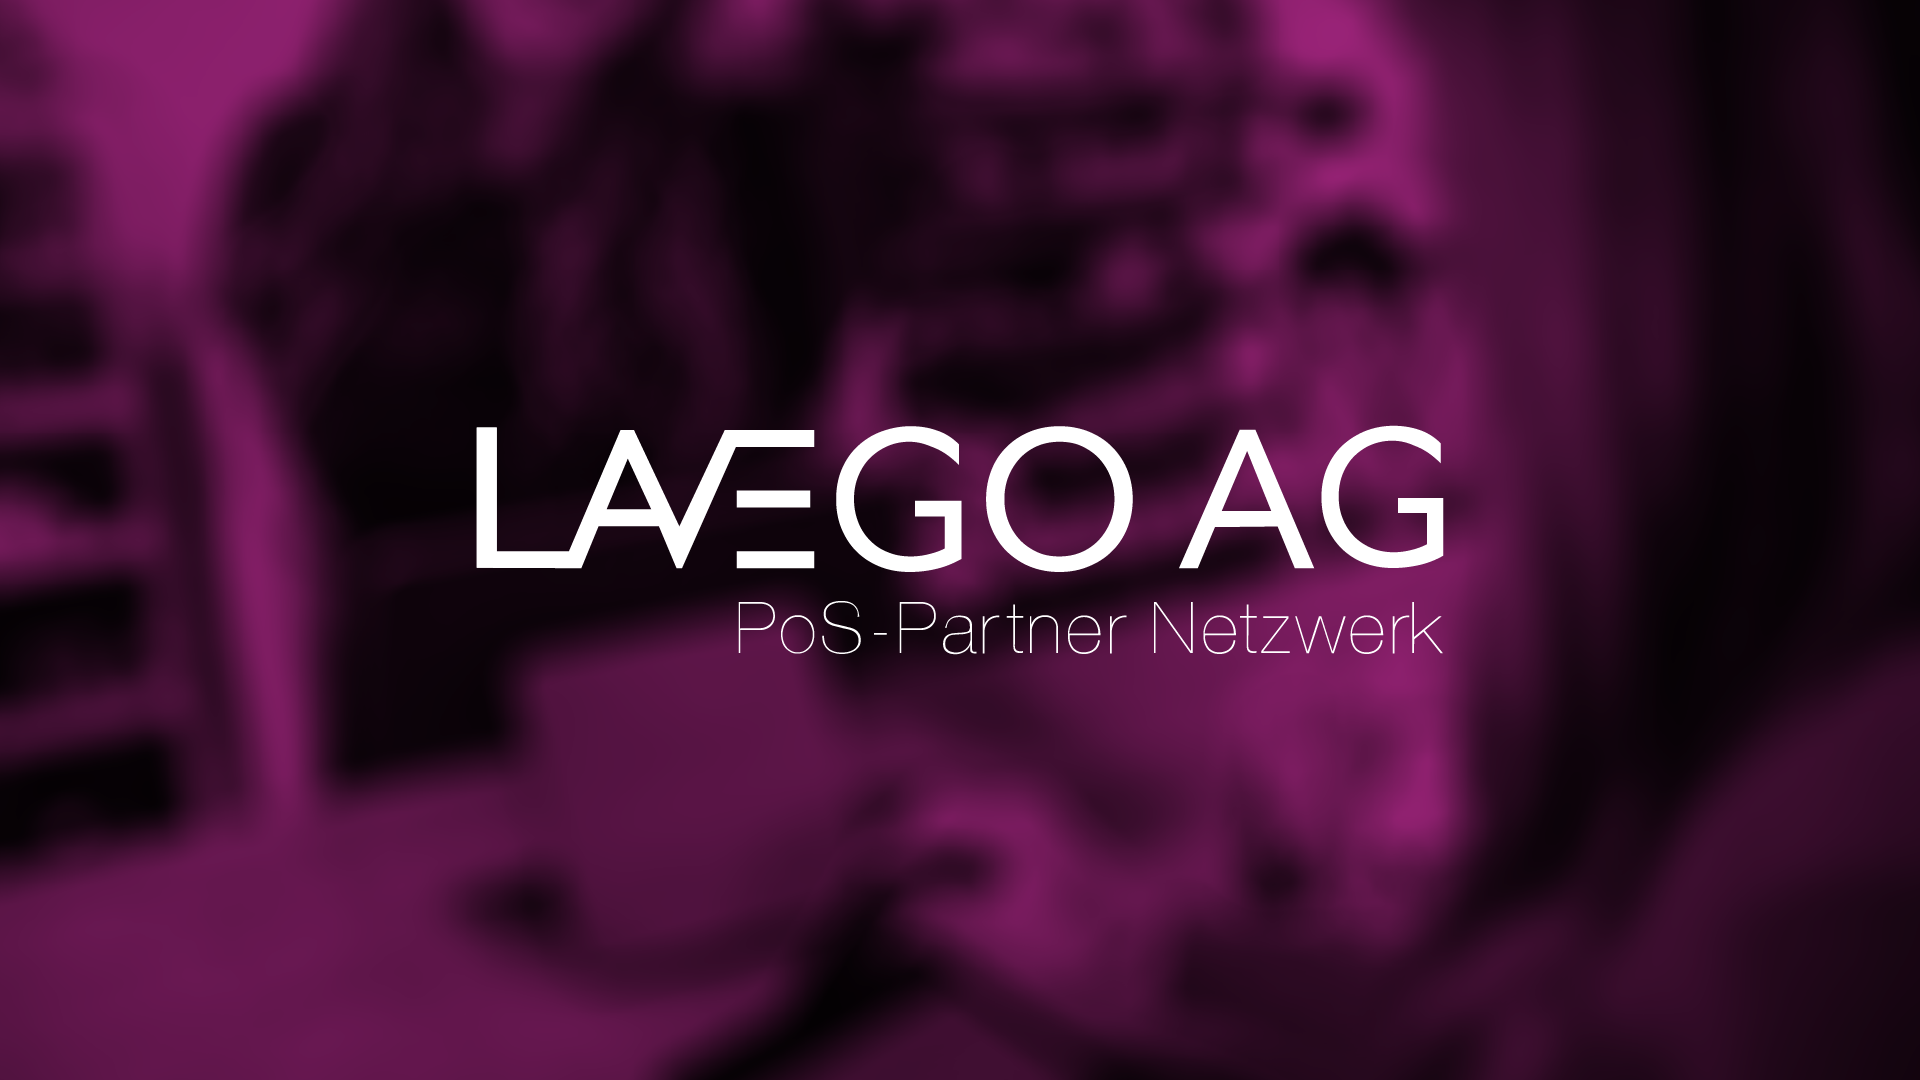 Seeking Ease of Use and Stability, Lavego AG Adopts D2iQ to Power Its Next Generation Merchant Payment System